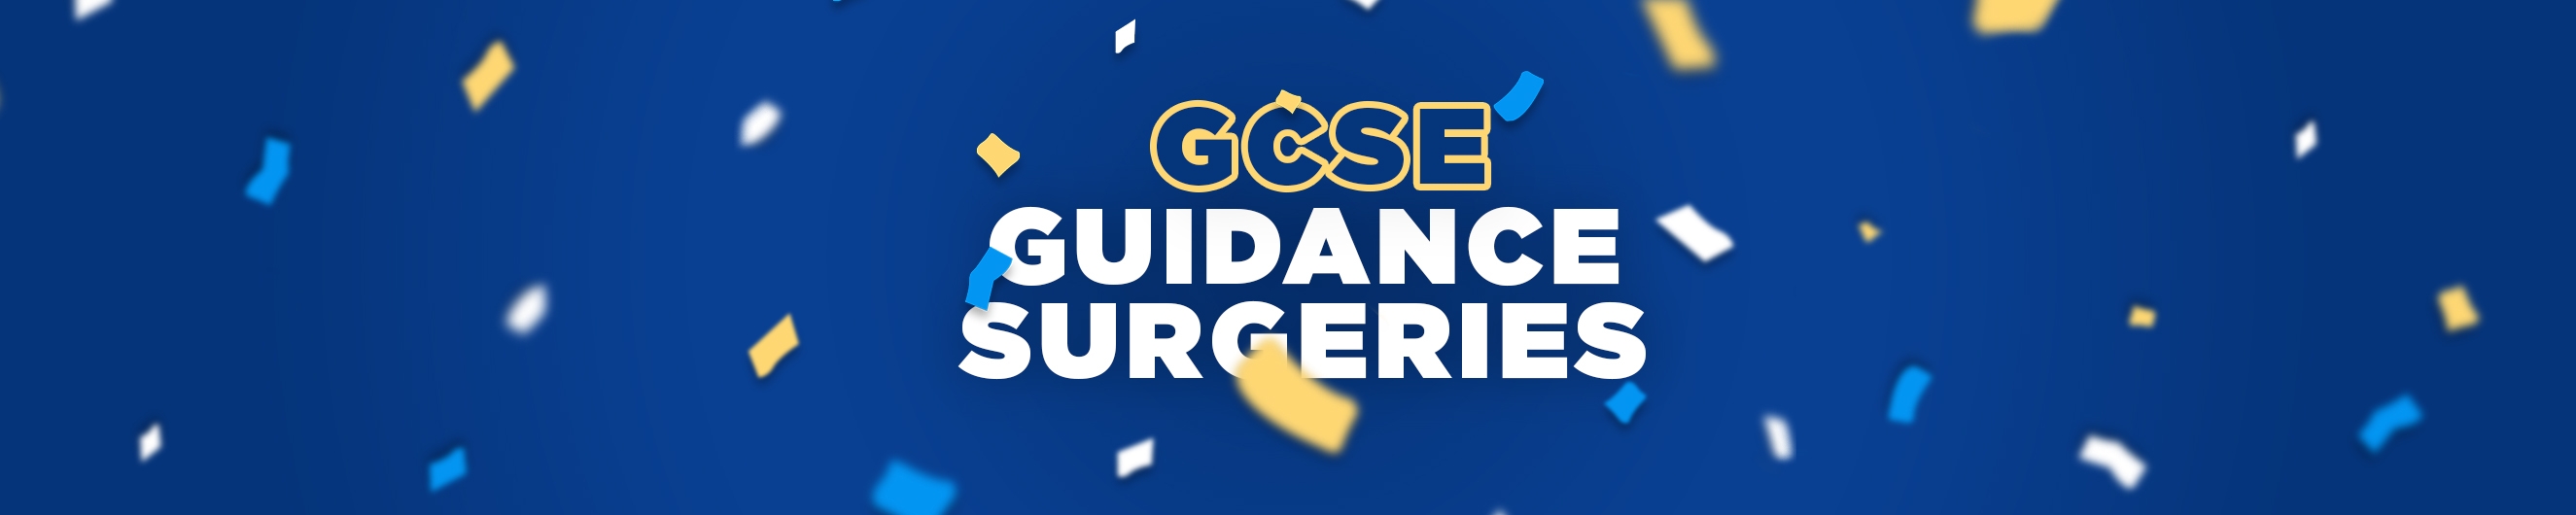 GCE guidance surgeries for GCSE results day in weston super mare